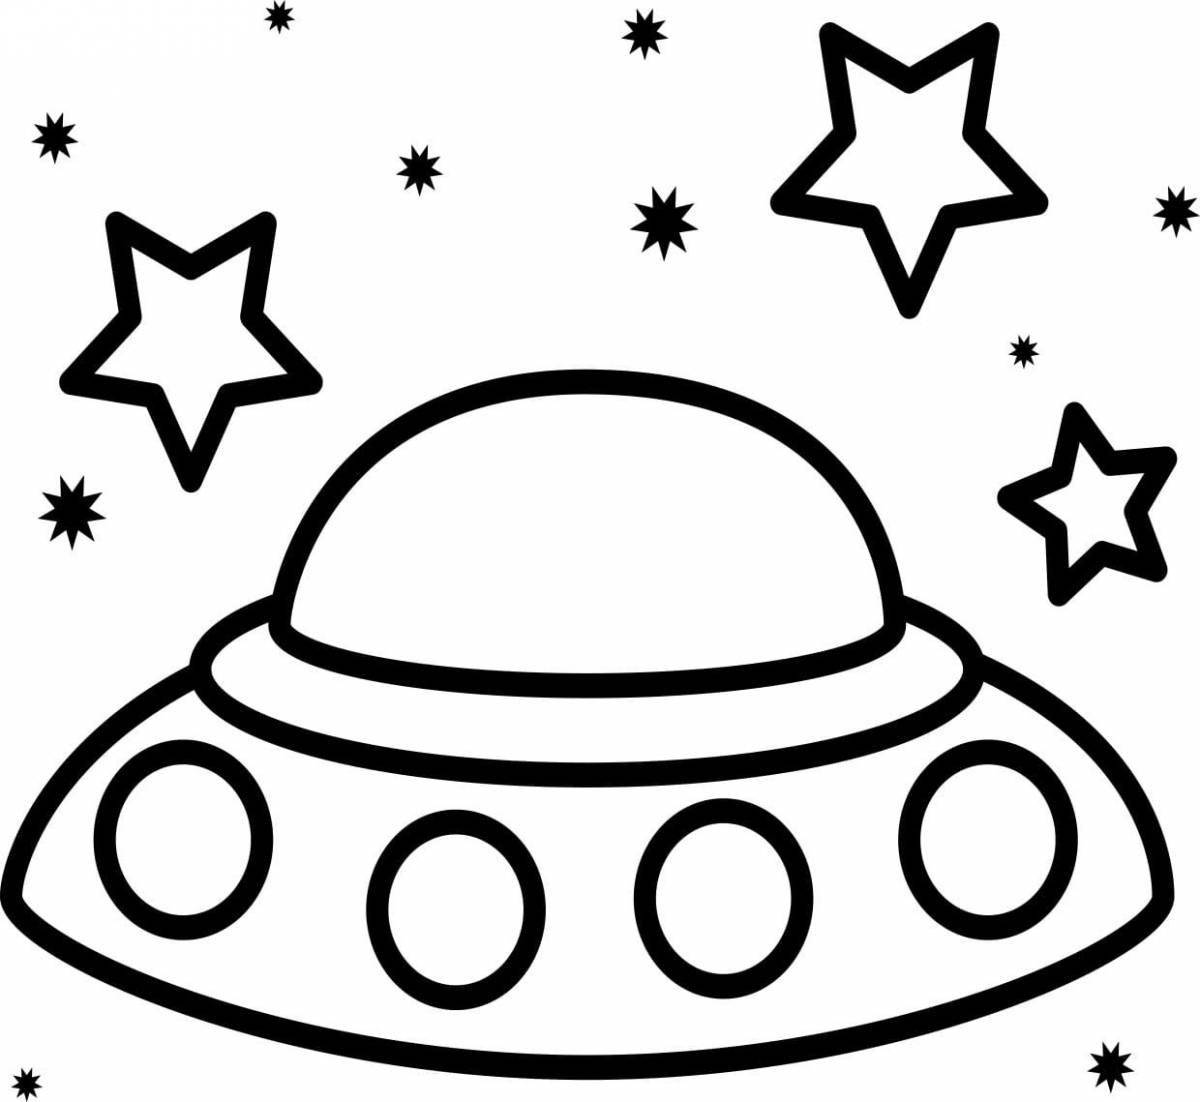 A fun flying saucer coloring book for kids